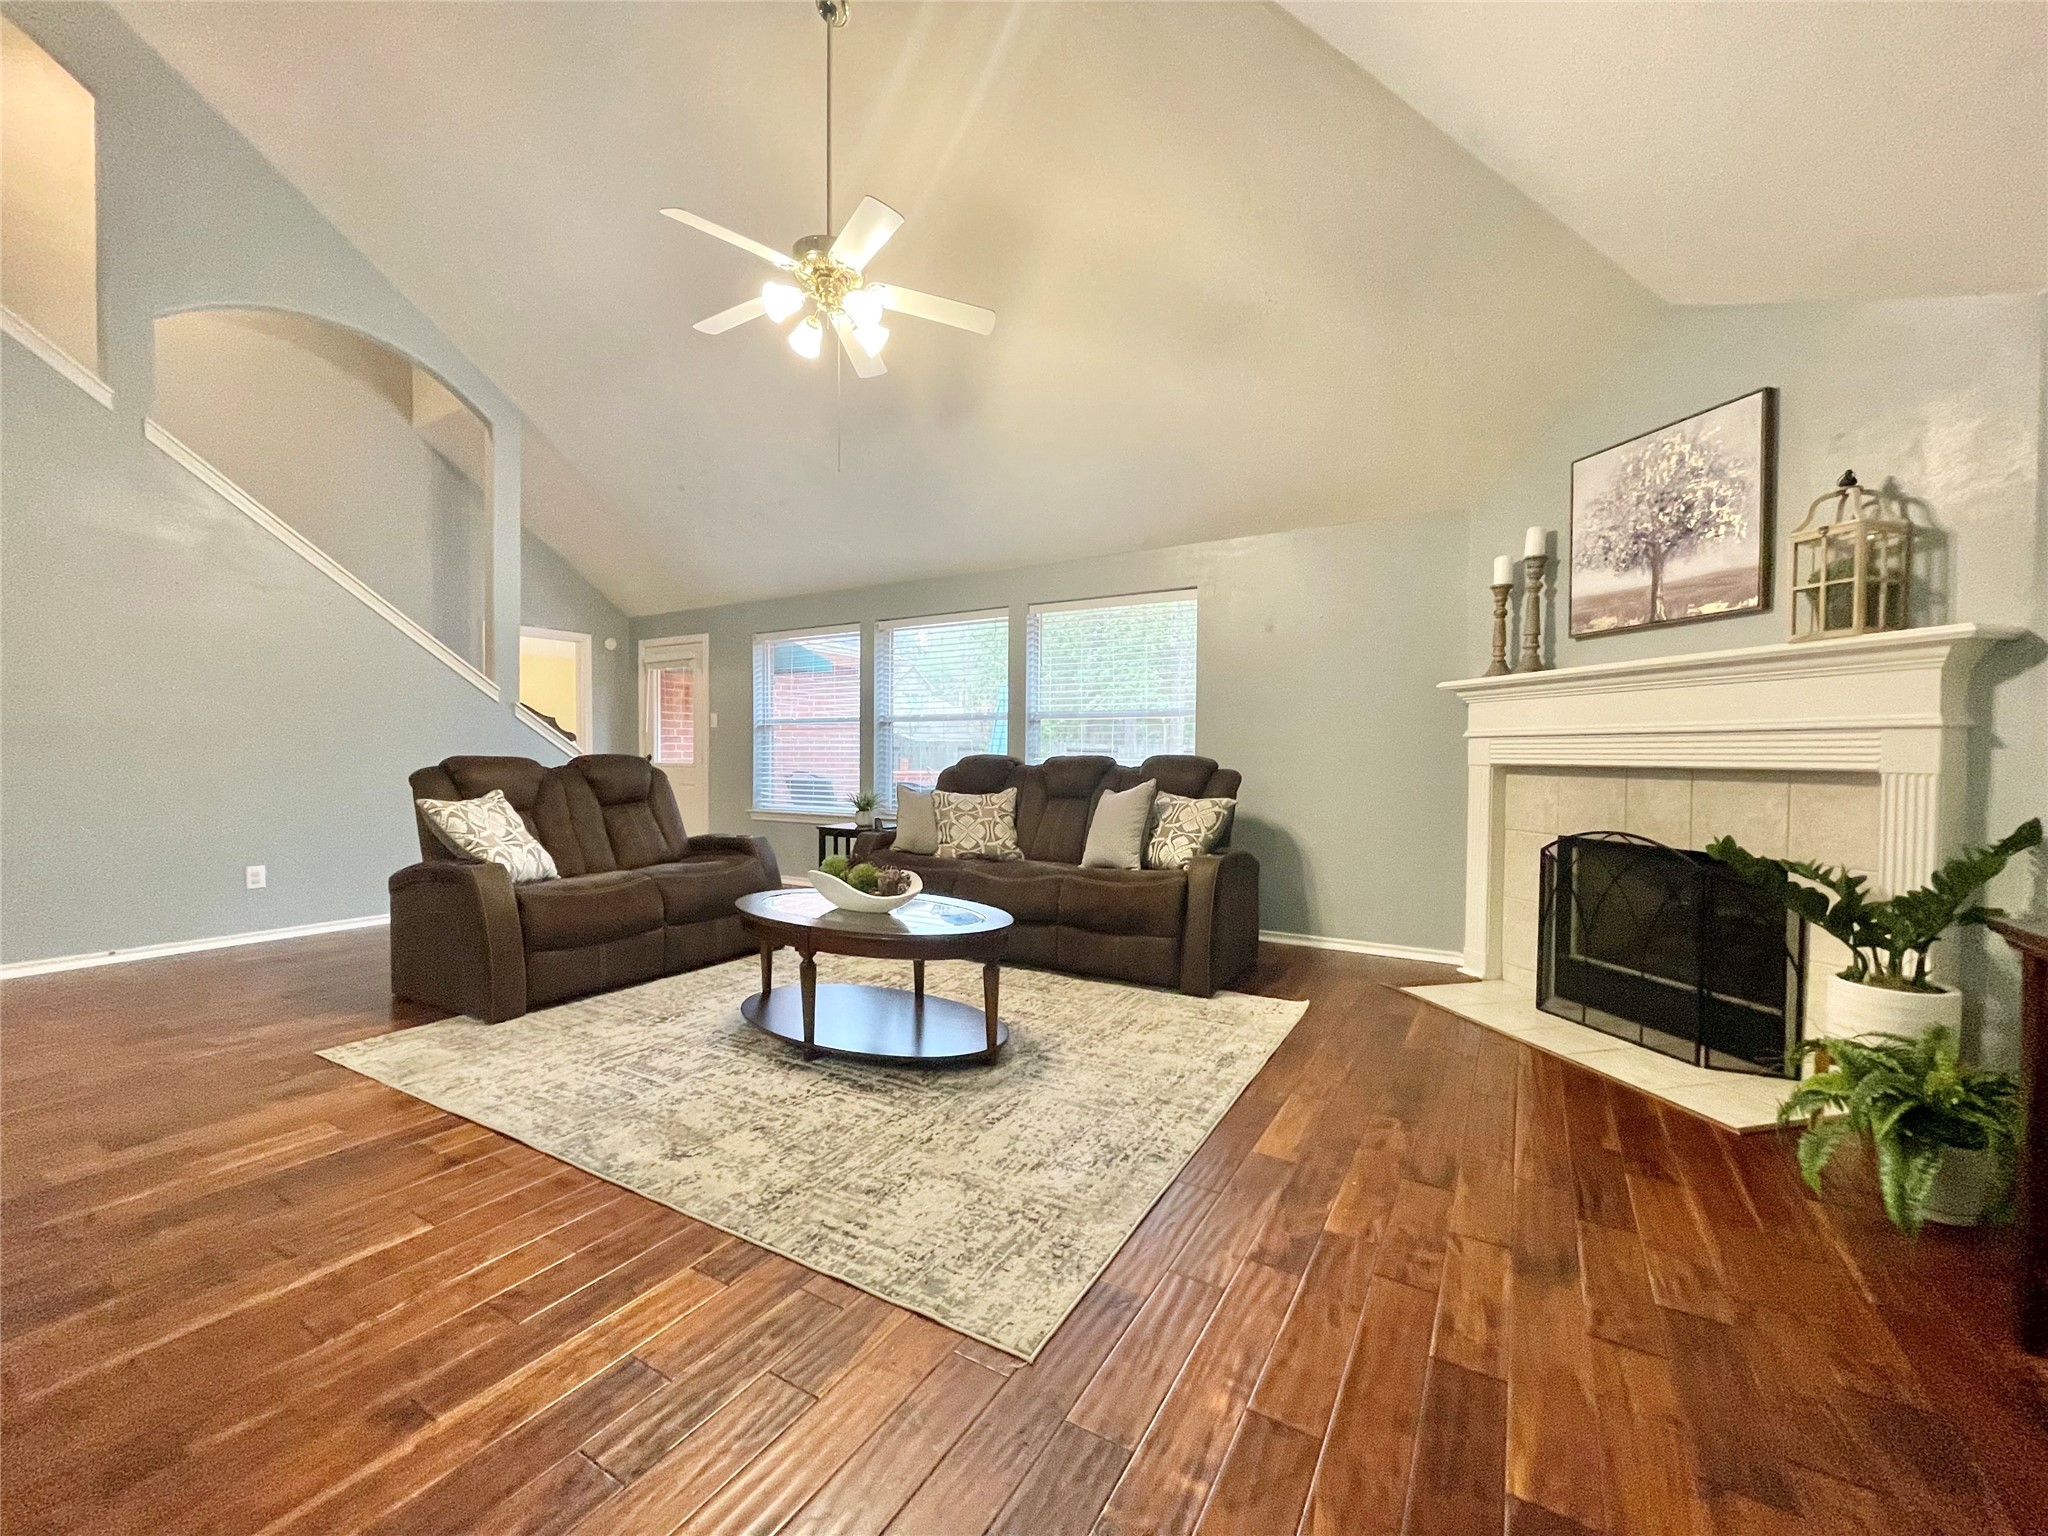 Welcome Home to 6 E Russet Grove in The Woodlands, TX